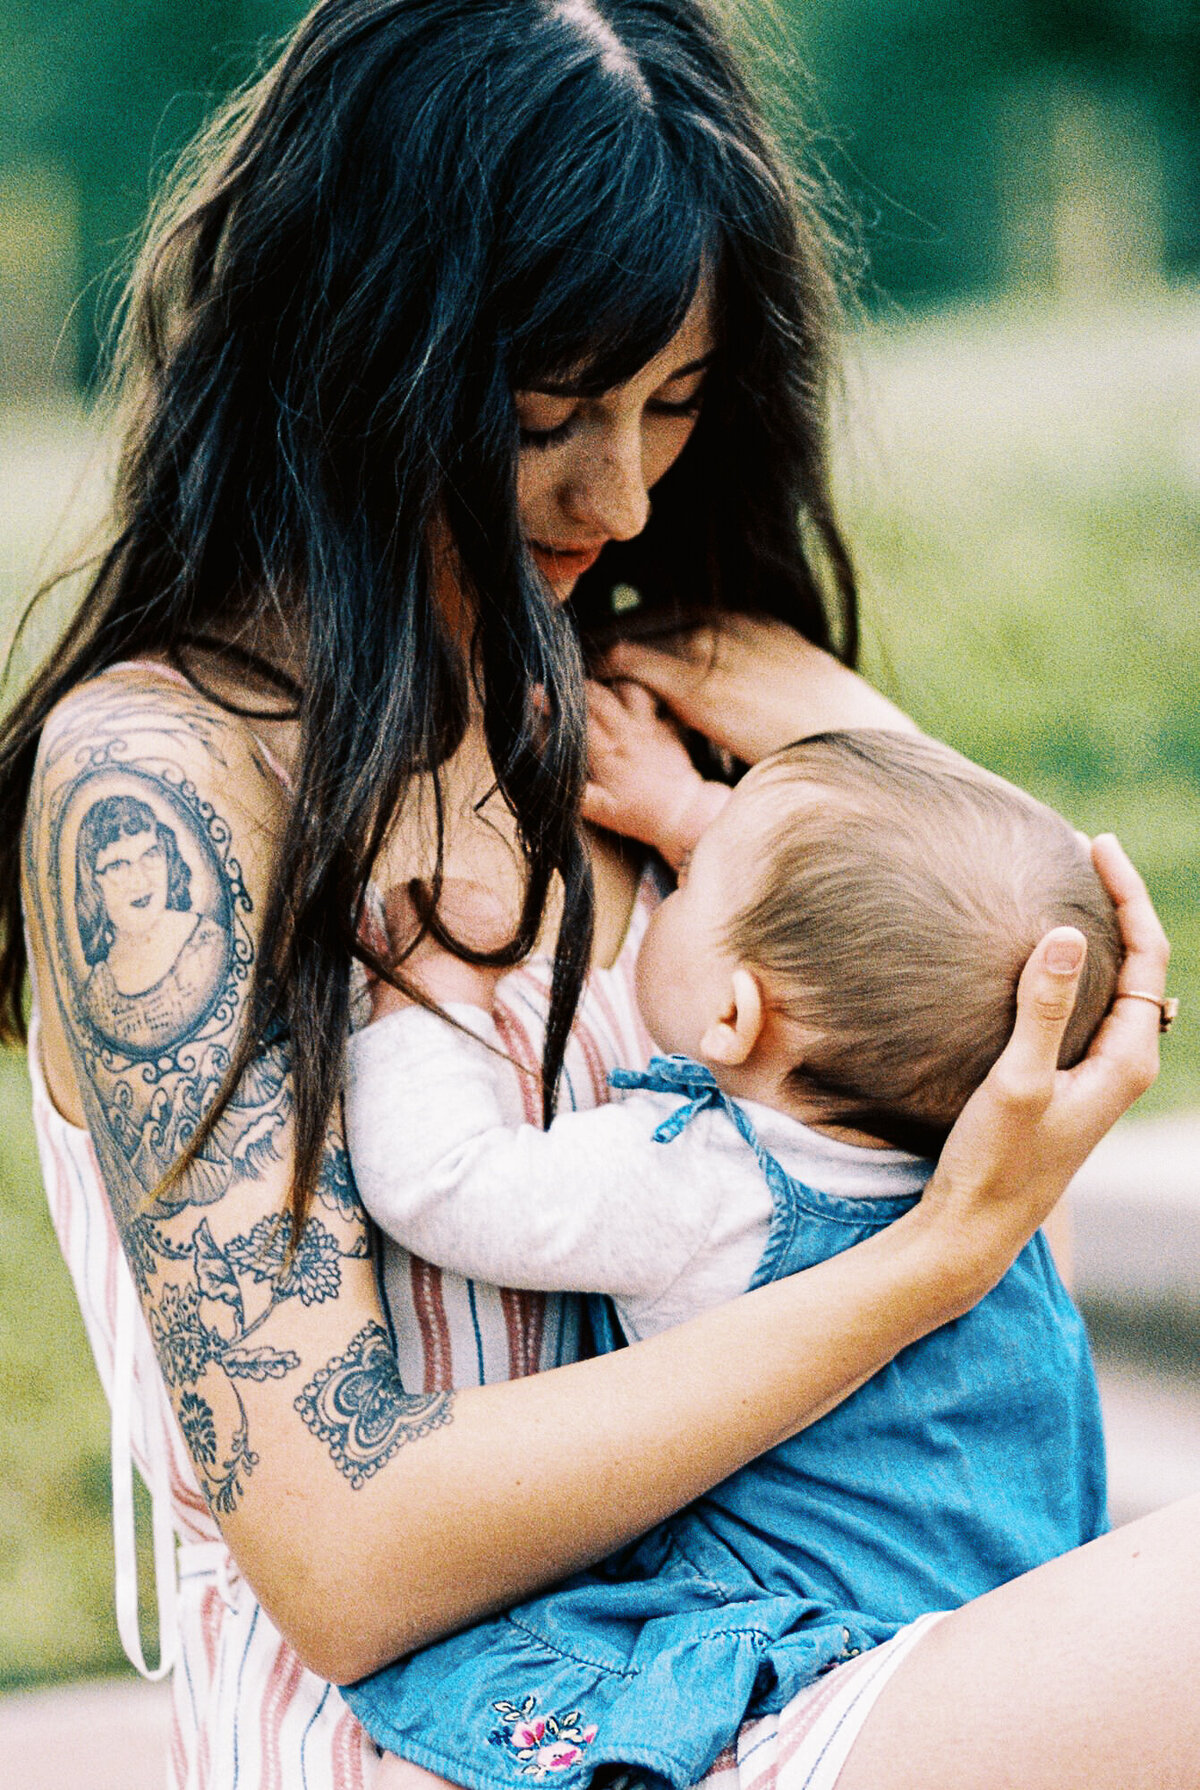 a woman with long hair looks down at her baby